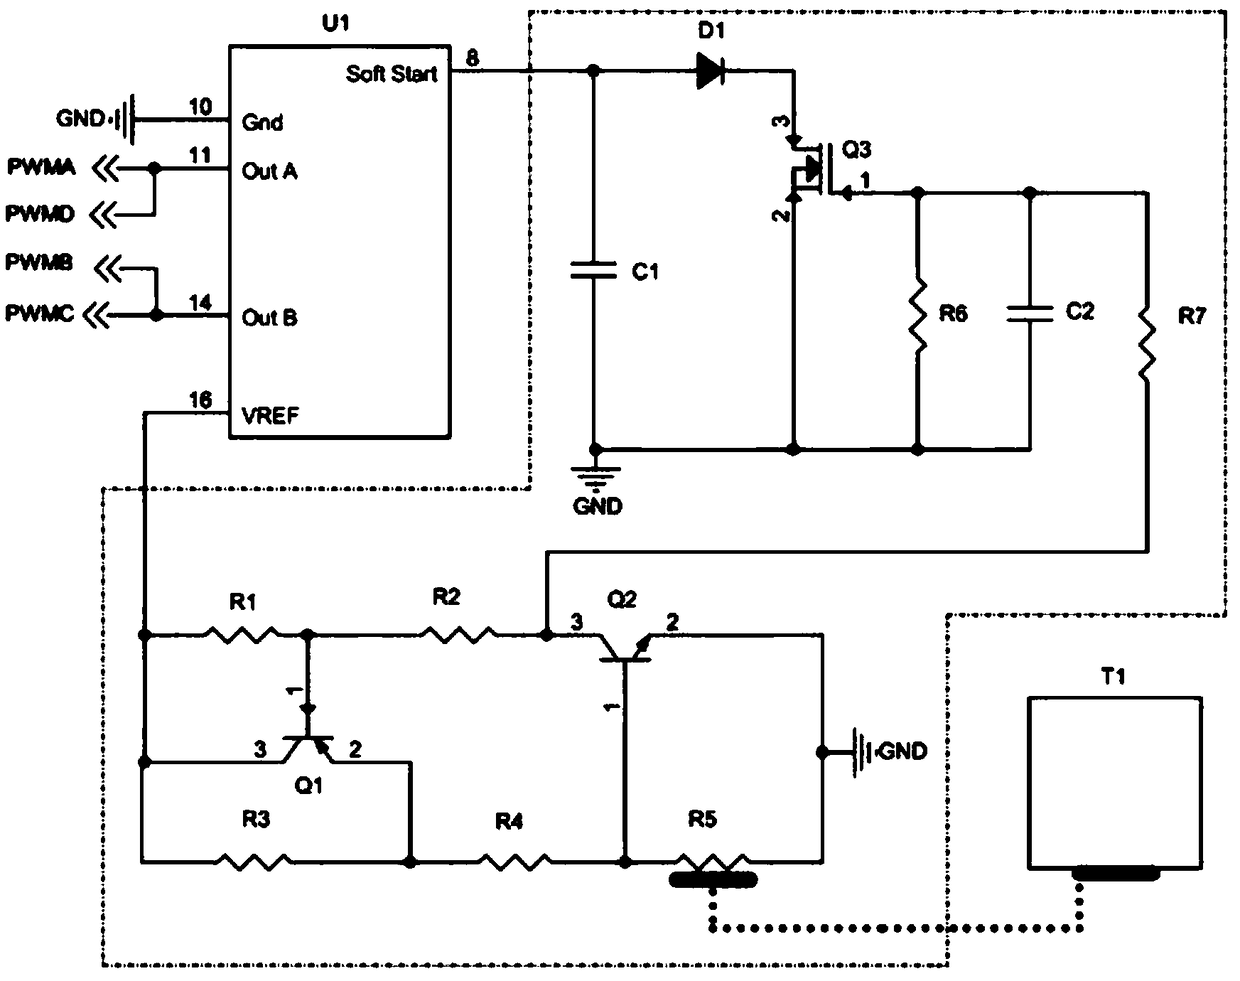 Overheat detection protection circuit for power device